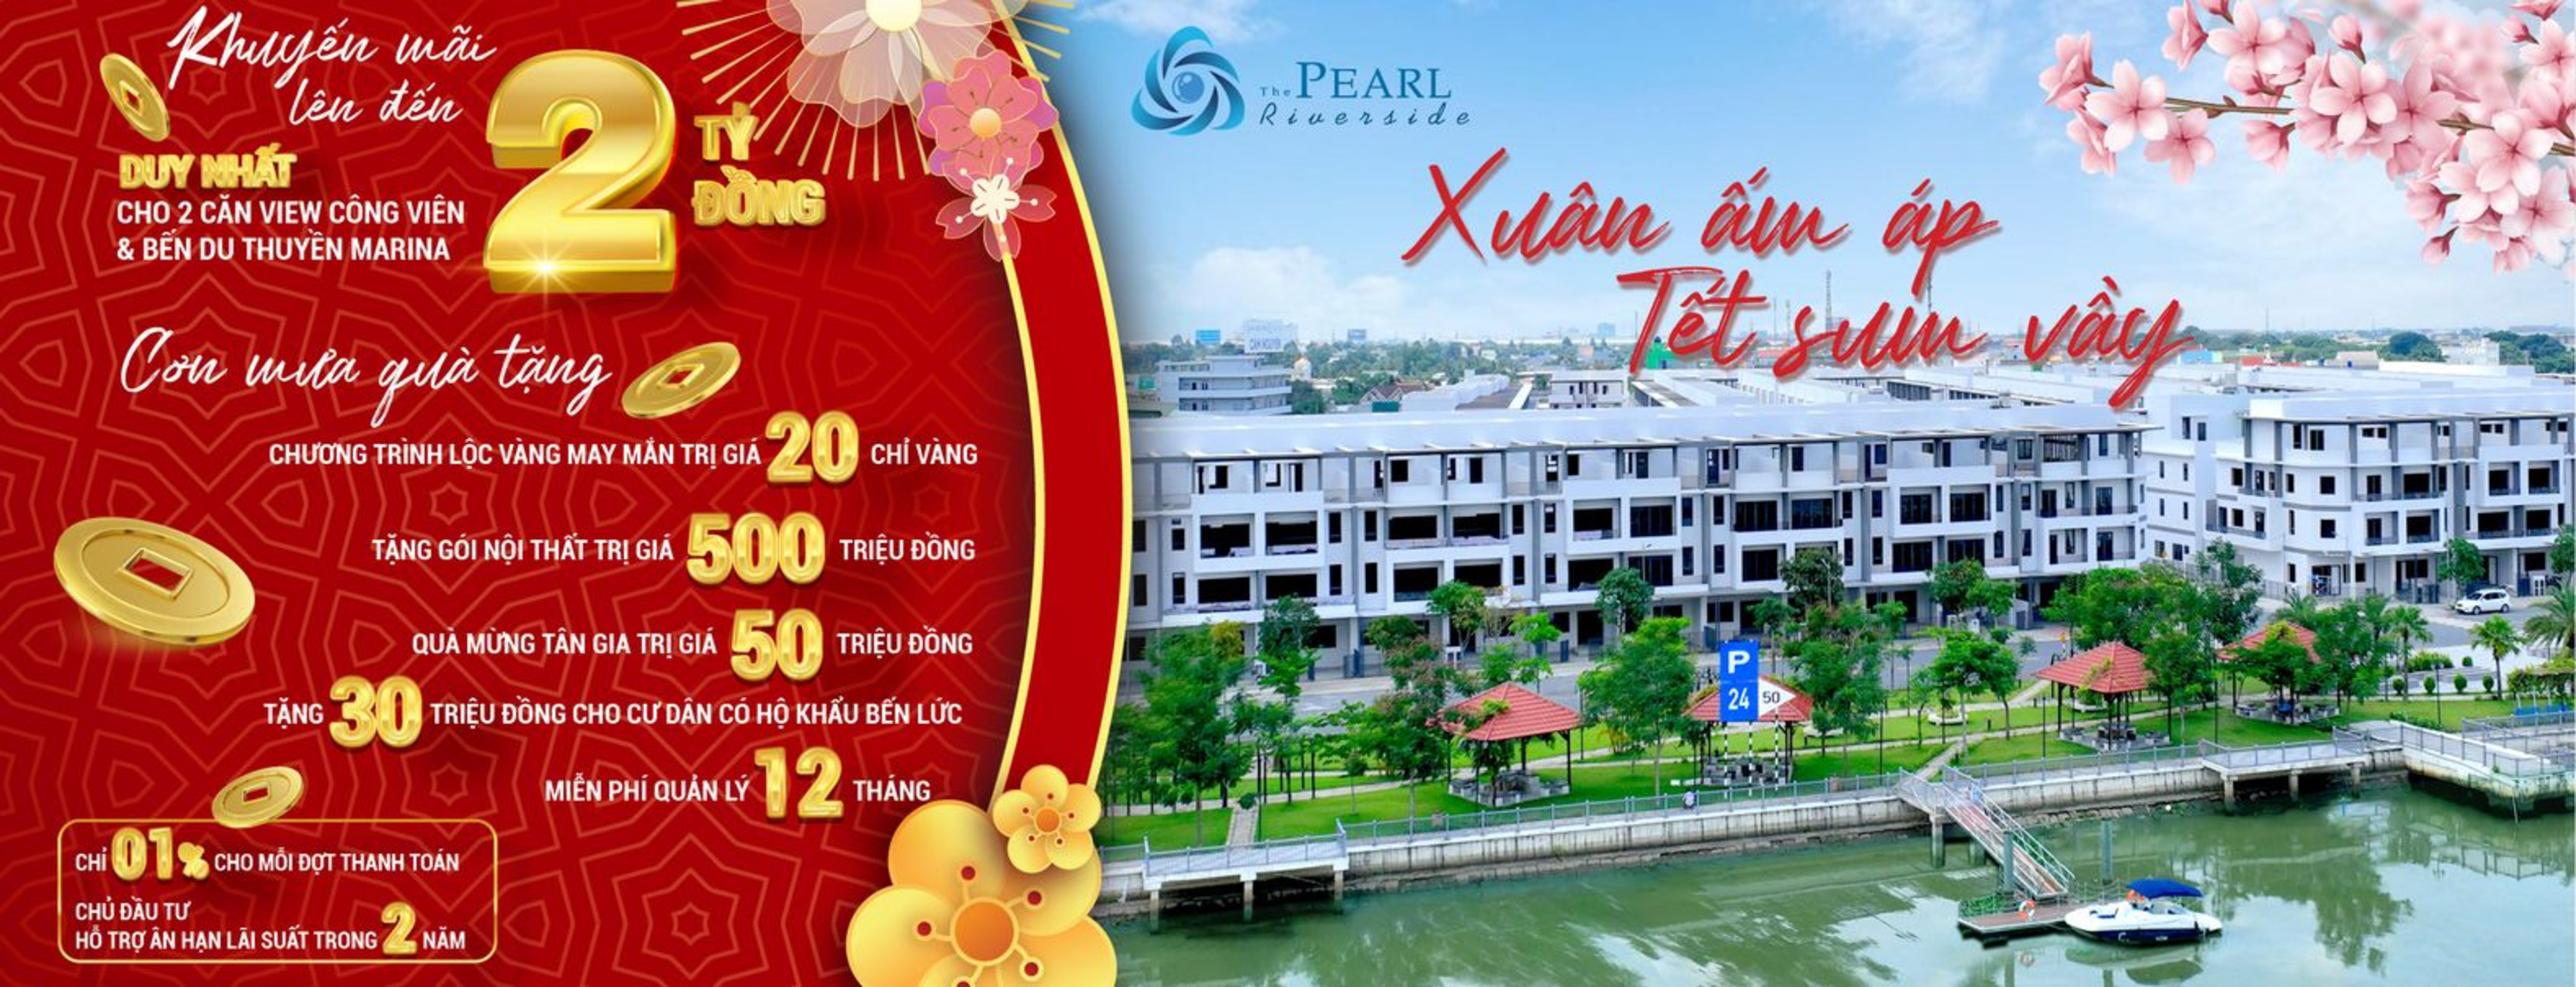 Banner The Pearl Riverside